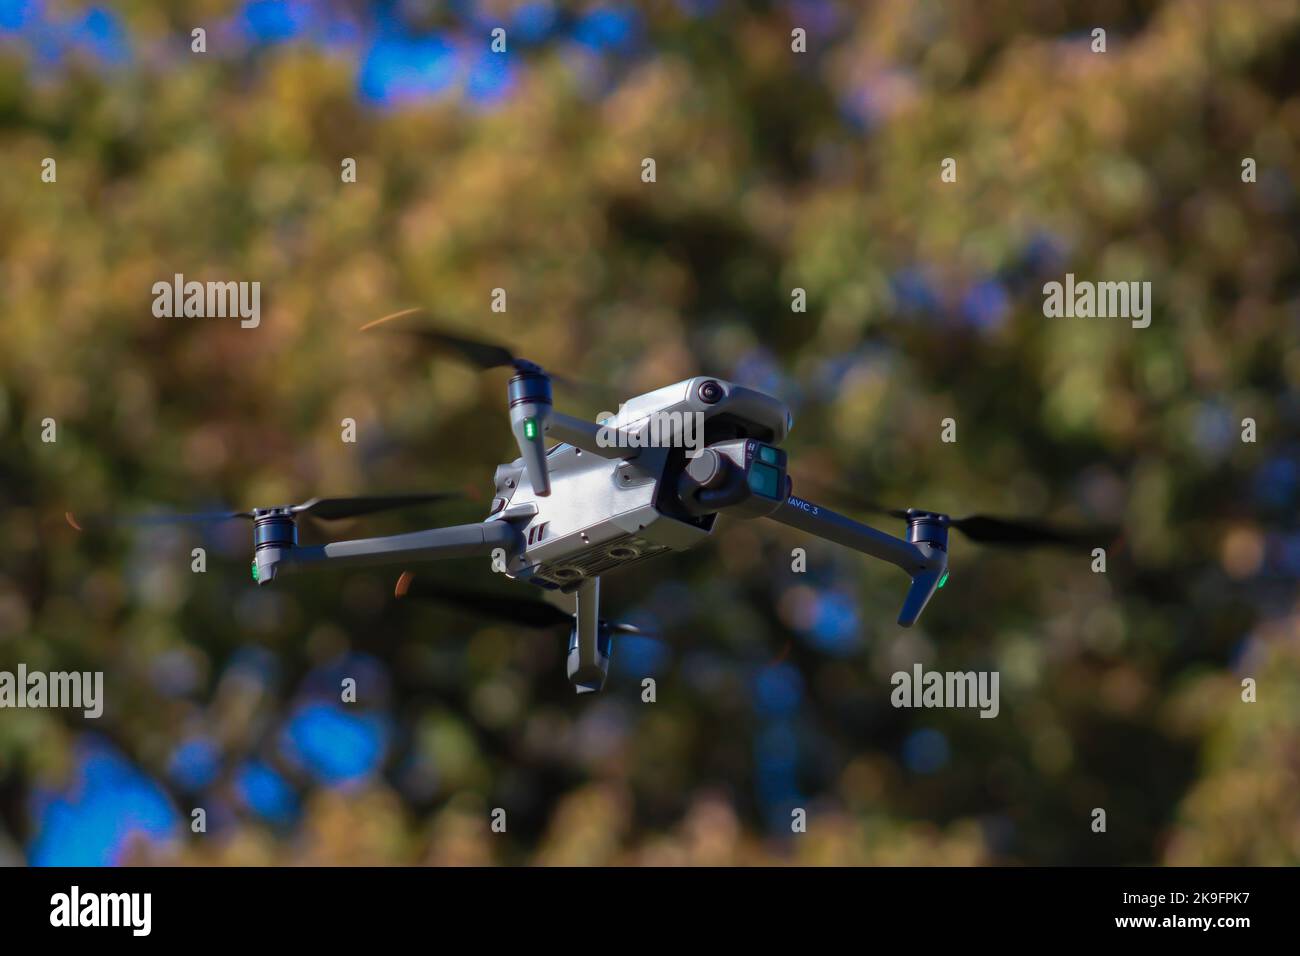 Drone flying in midair Stock Photo